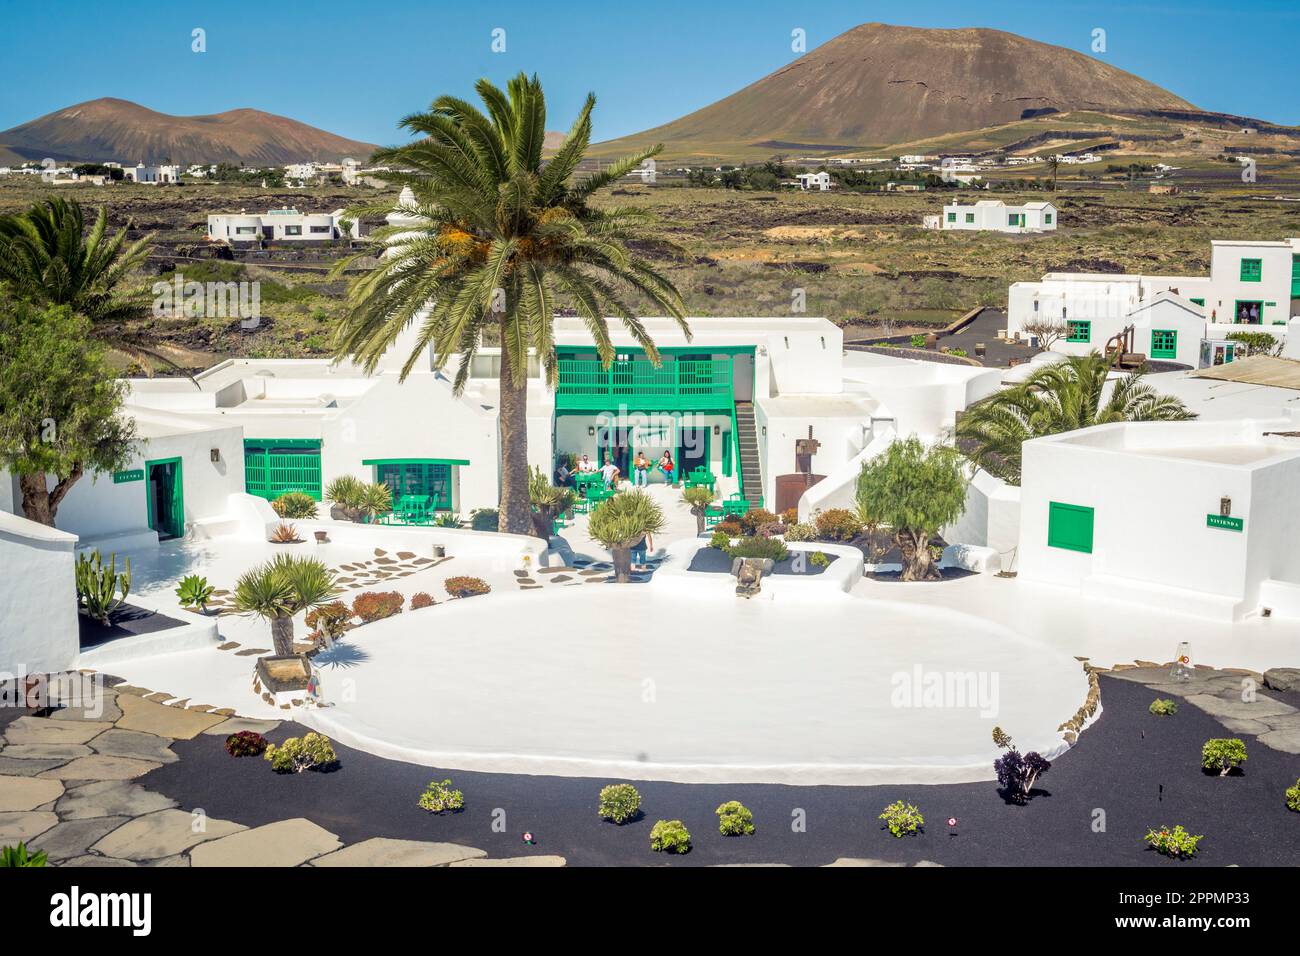 View on Casa Museo del Campesino, Cesar Manrique his work in recognition towards the efforts of the farmers of Lanzarote Stock Photo